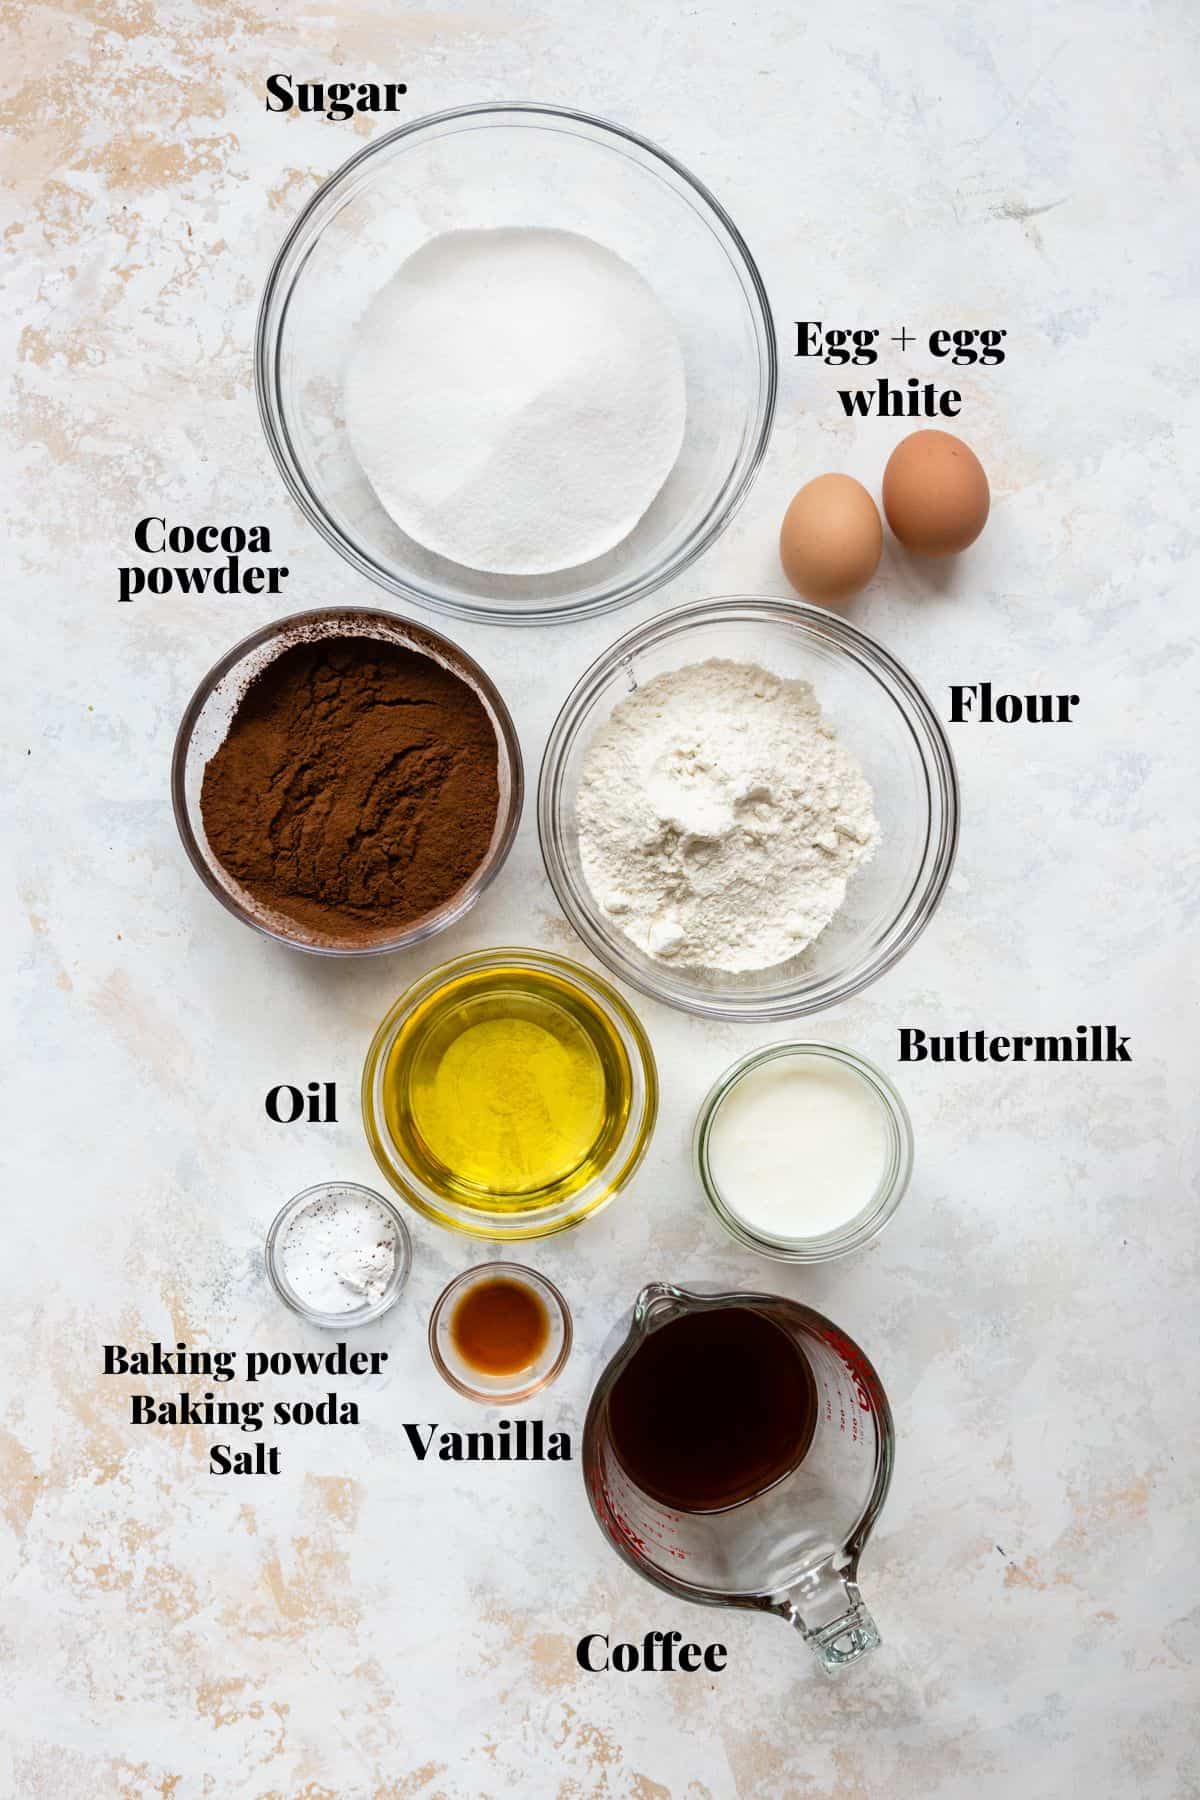 Ingredients to make chocolate cupcakes on a white and pink surface.